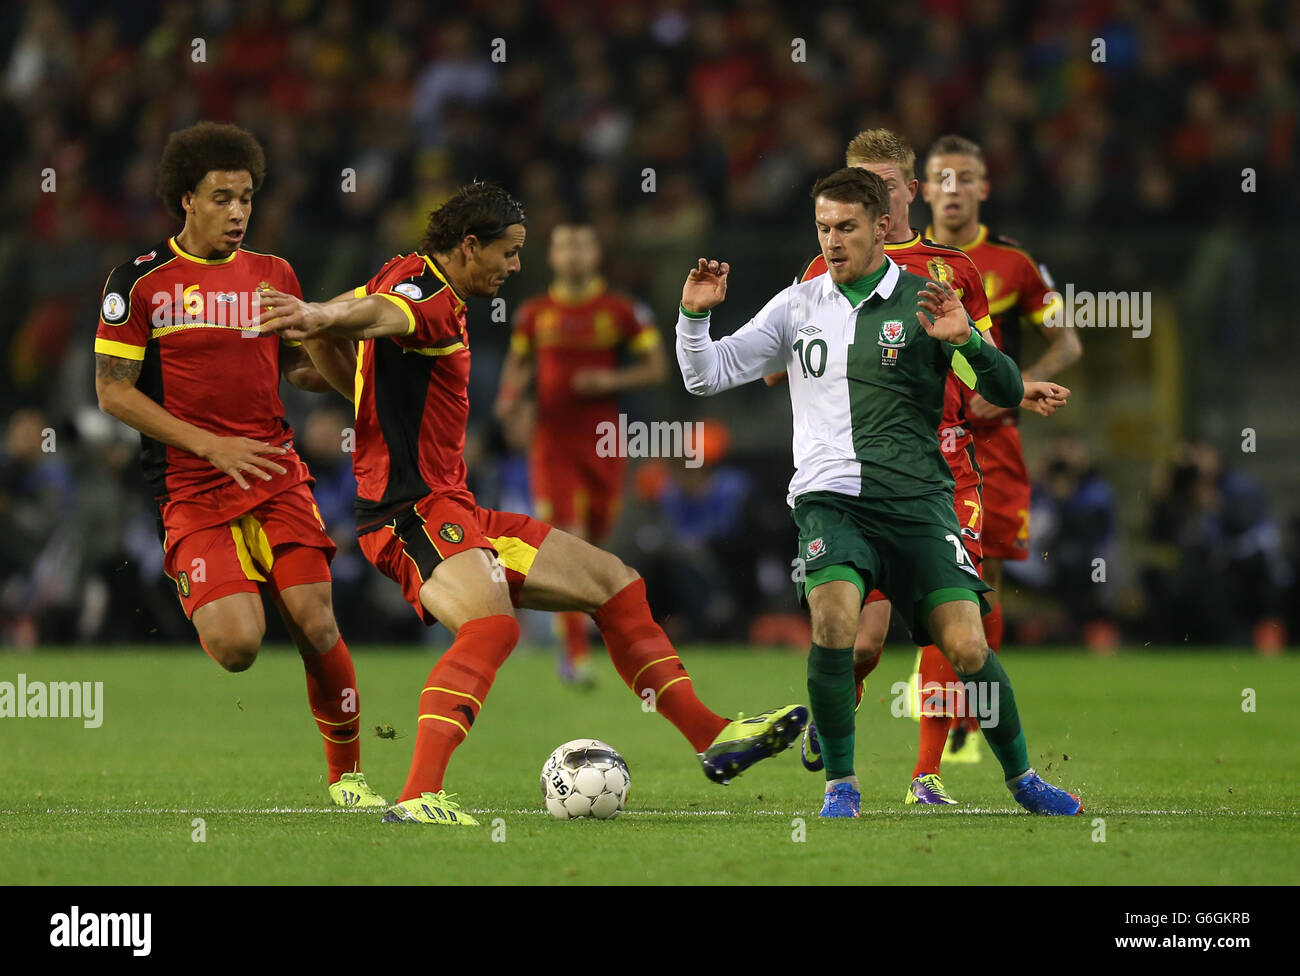 Belgium's Daniel Van Buyten and Wales' Aaron Ramsey in action during the FIFA 2014 World Cup Qualifying, Group A match at the Koning Boudewijnstadion, Brussels, Belgium. Stock Photo